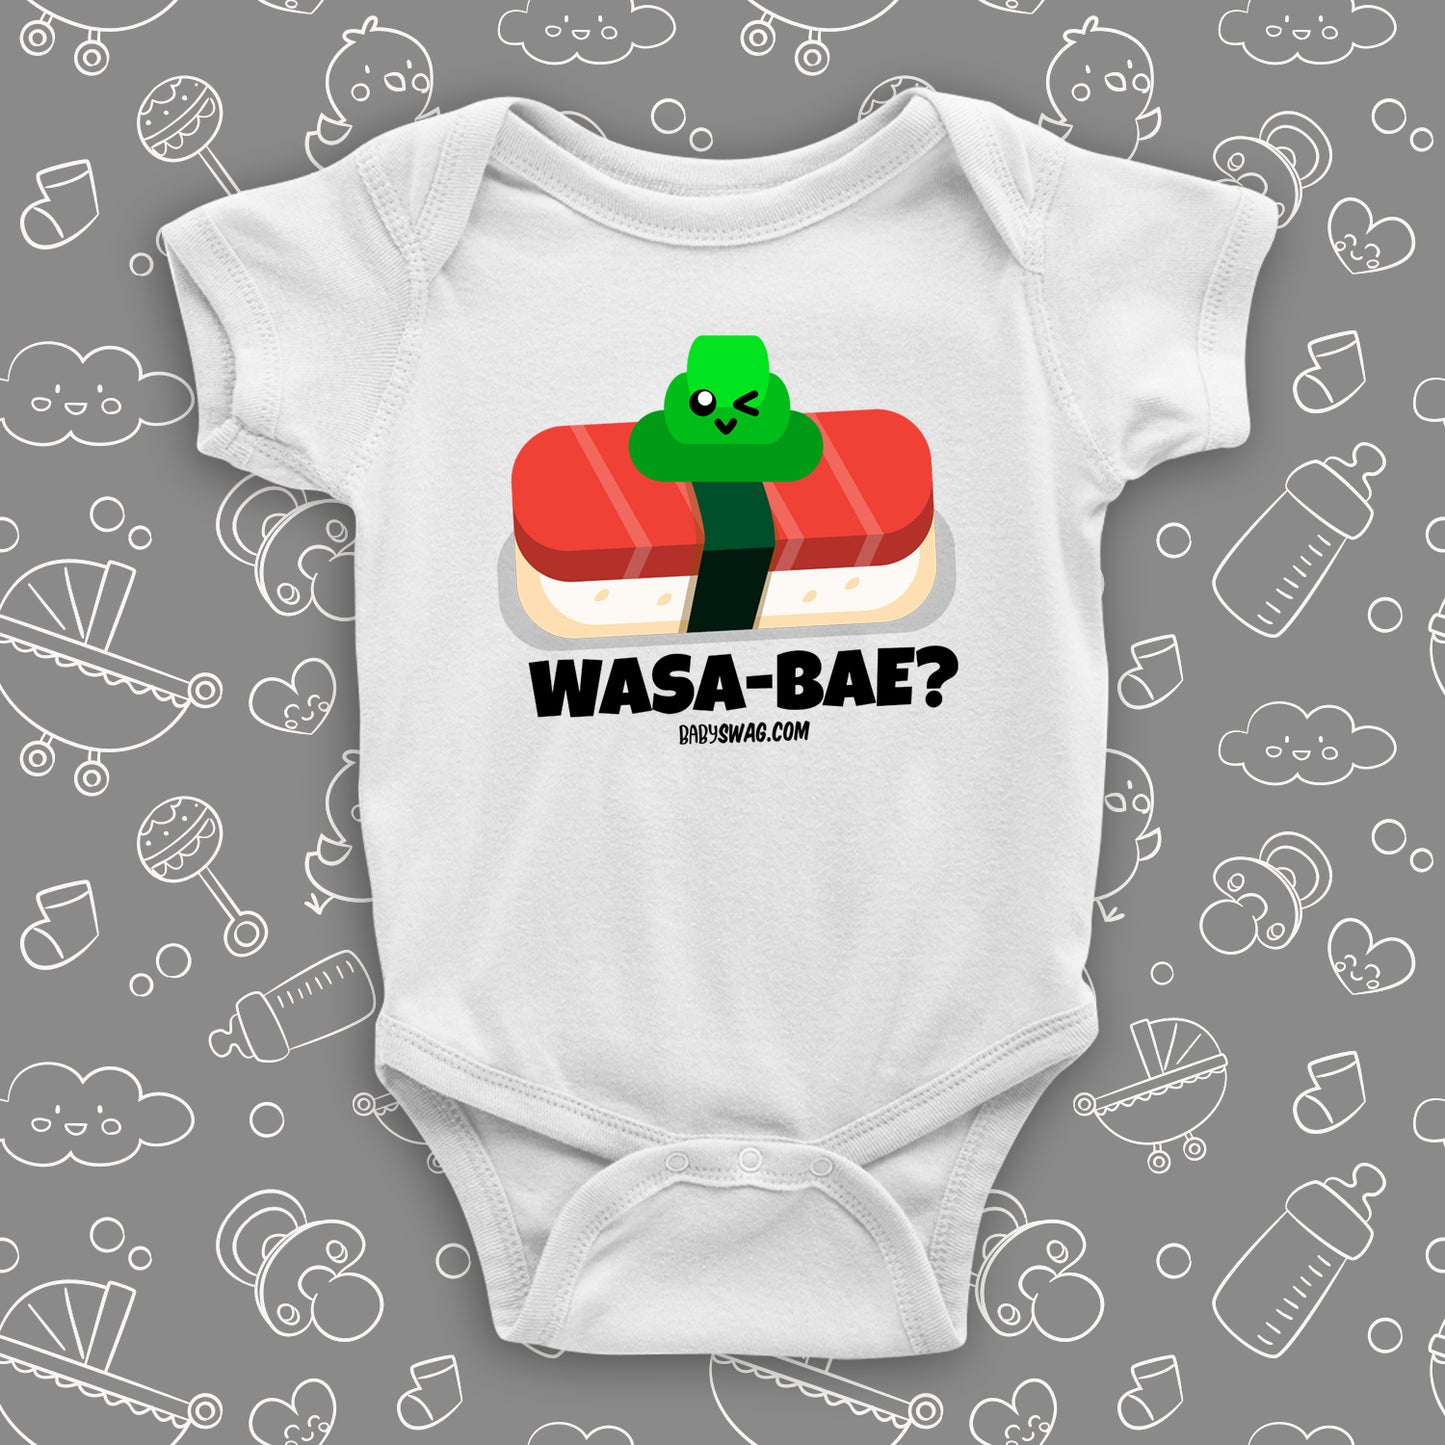 The ''Wasa-bae'' cool baby onesies in white.